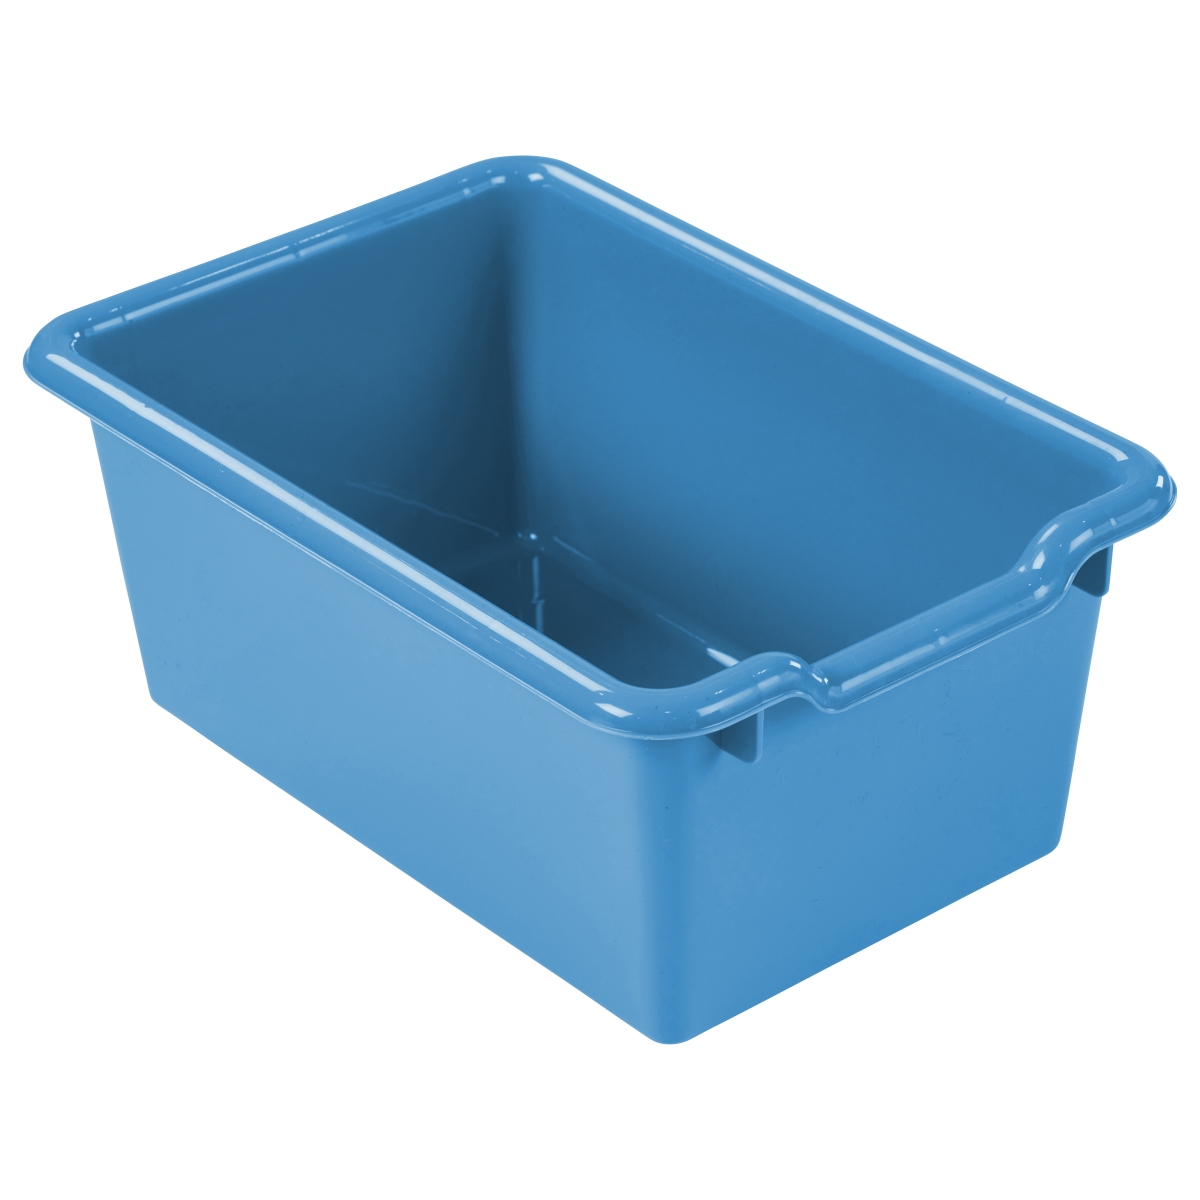 Elr-0482-fb 11.50 X 8 X 5 In. Scoop Front Storage Bins - French Blue Case Pack Of 10